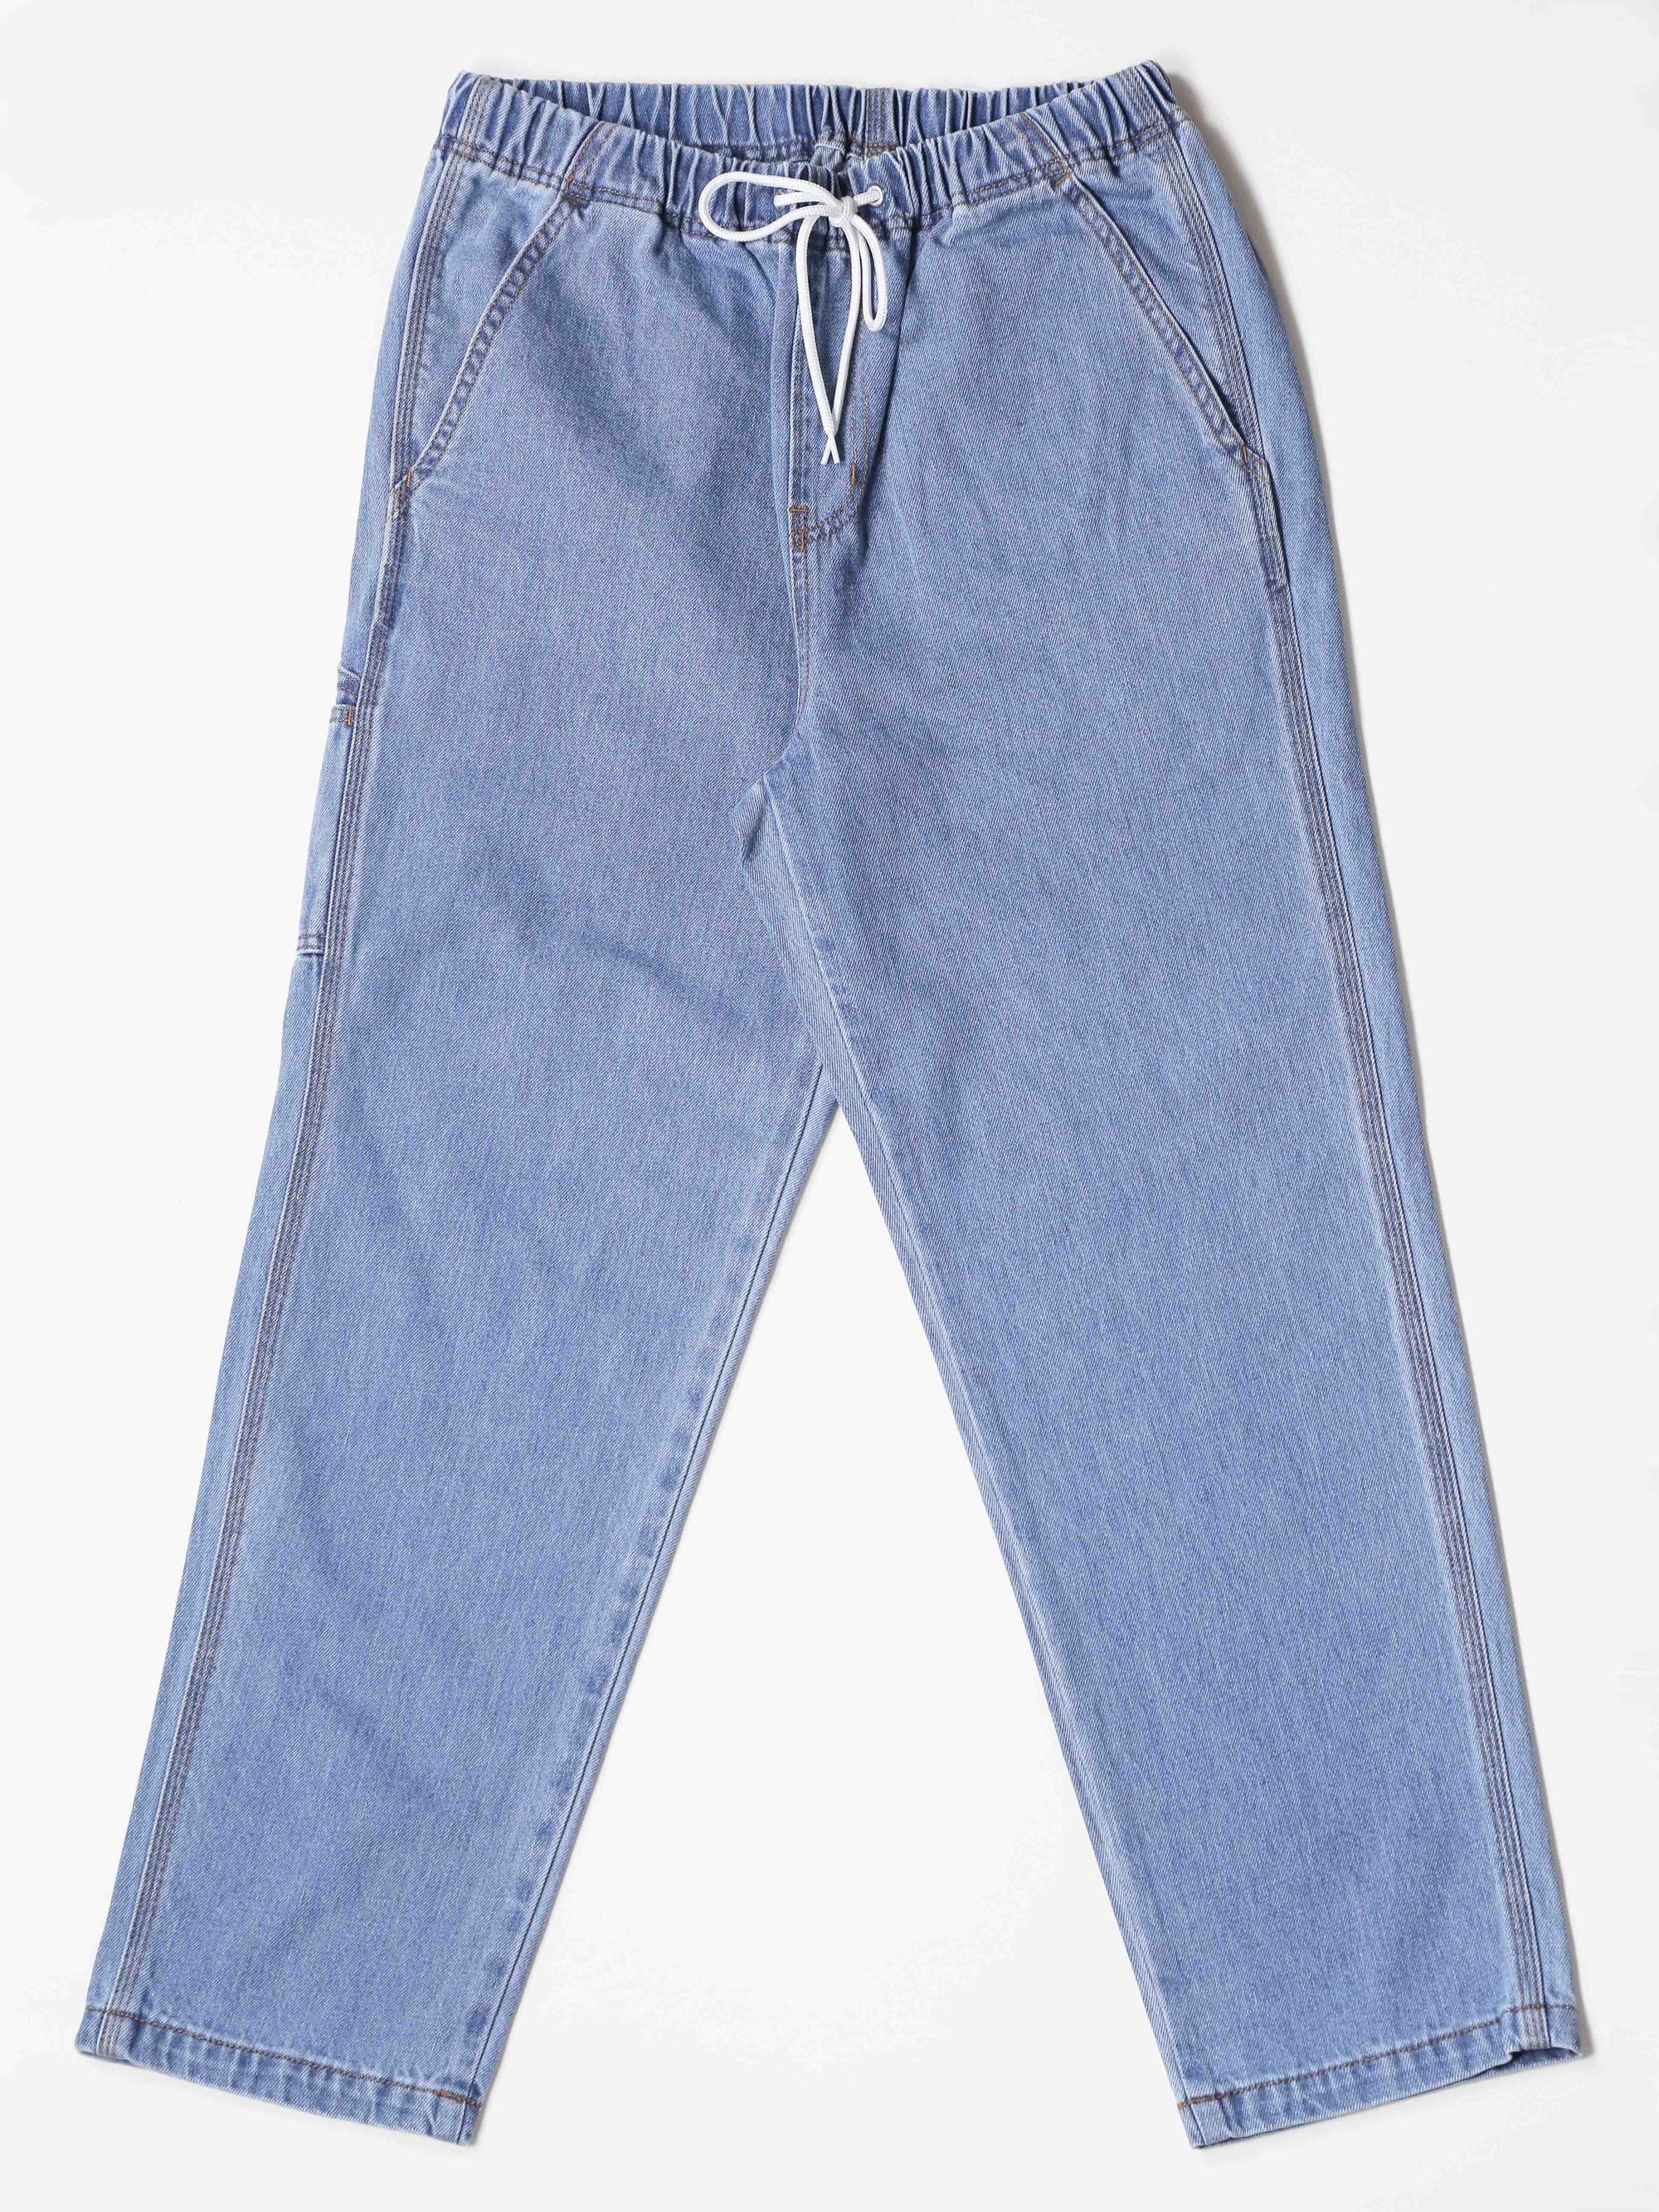 Utility Pants Denim Bleached Color Bobson Workers